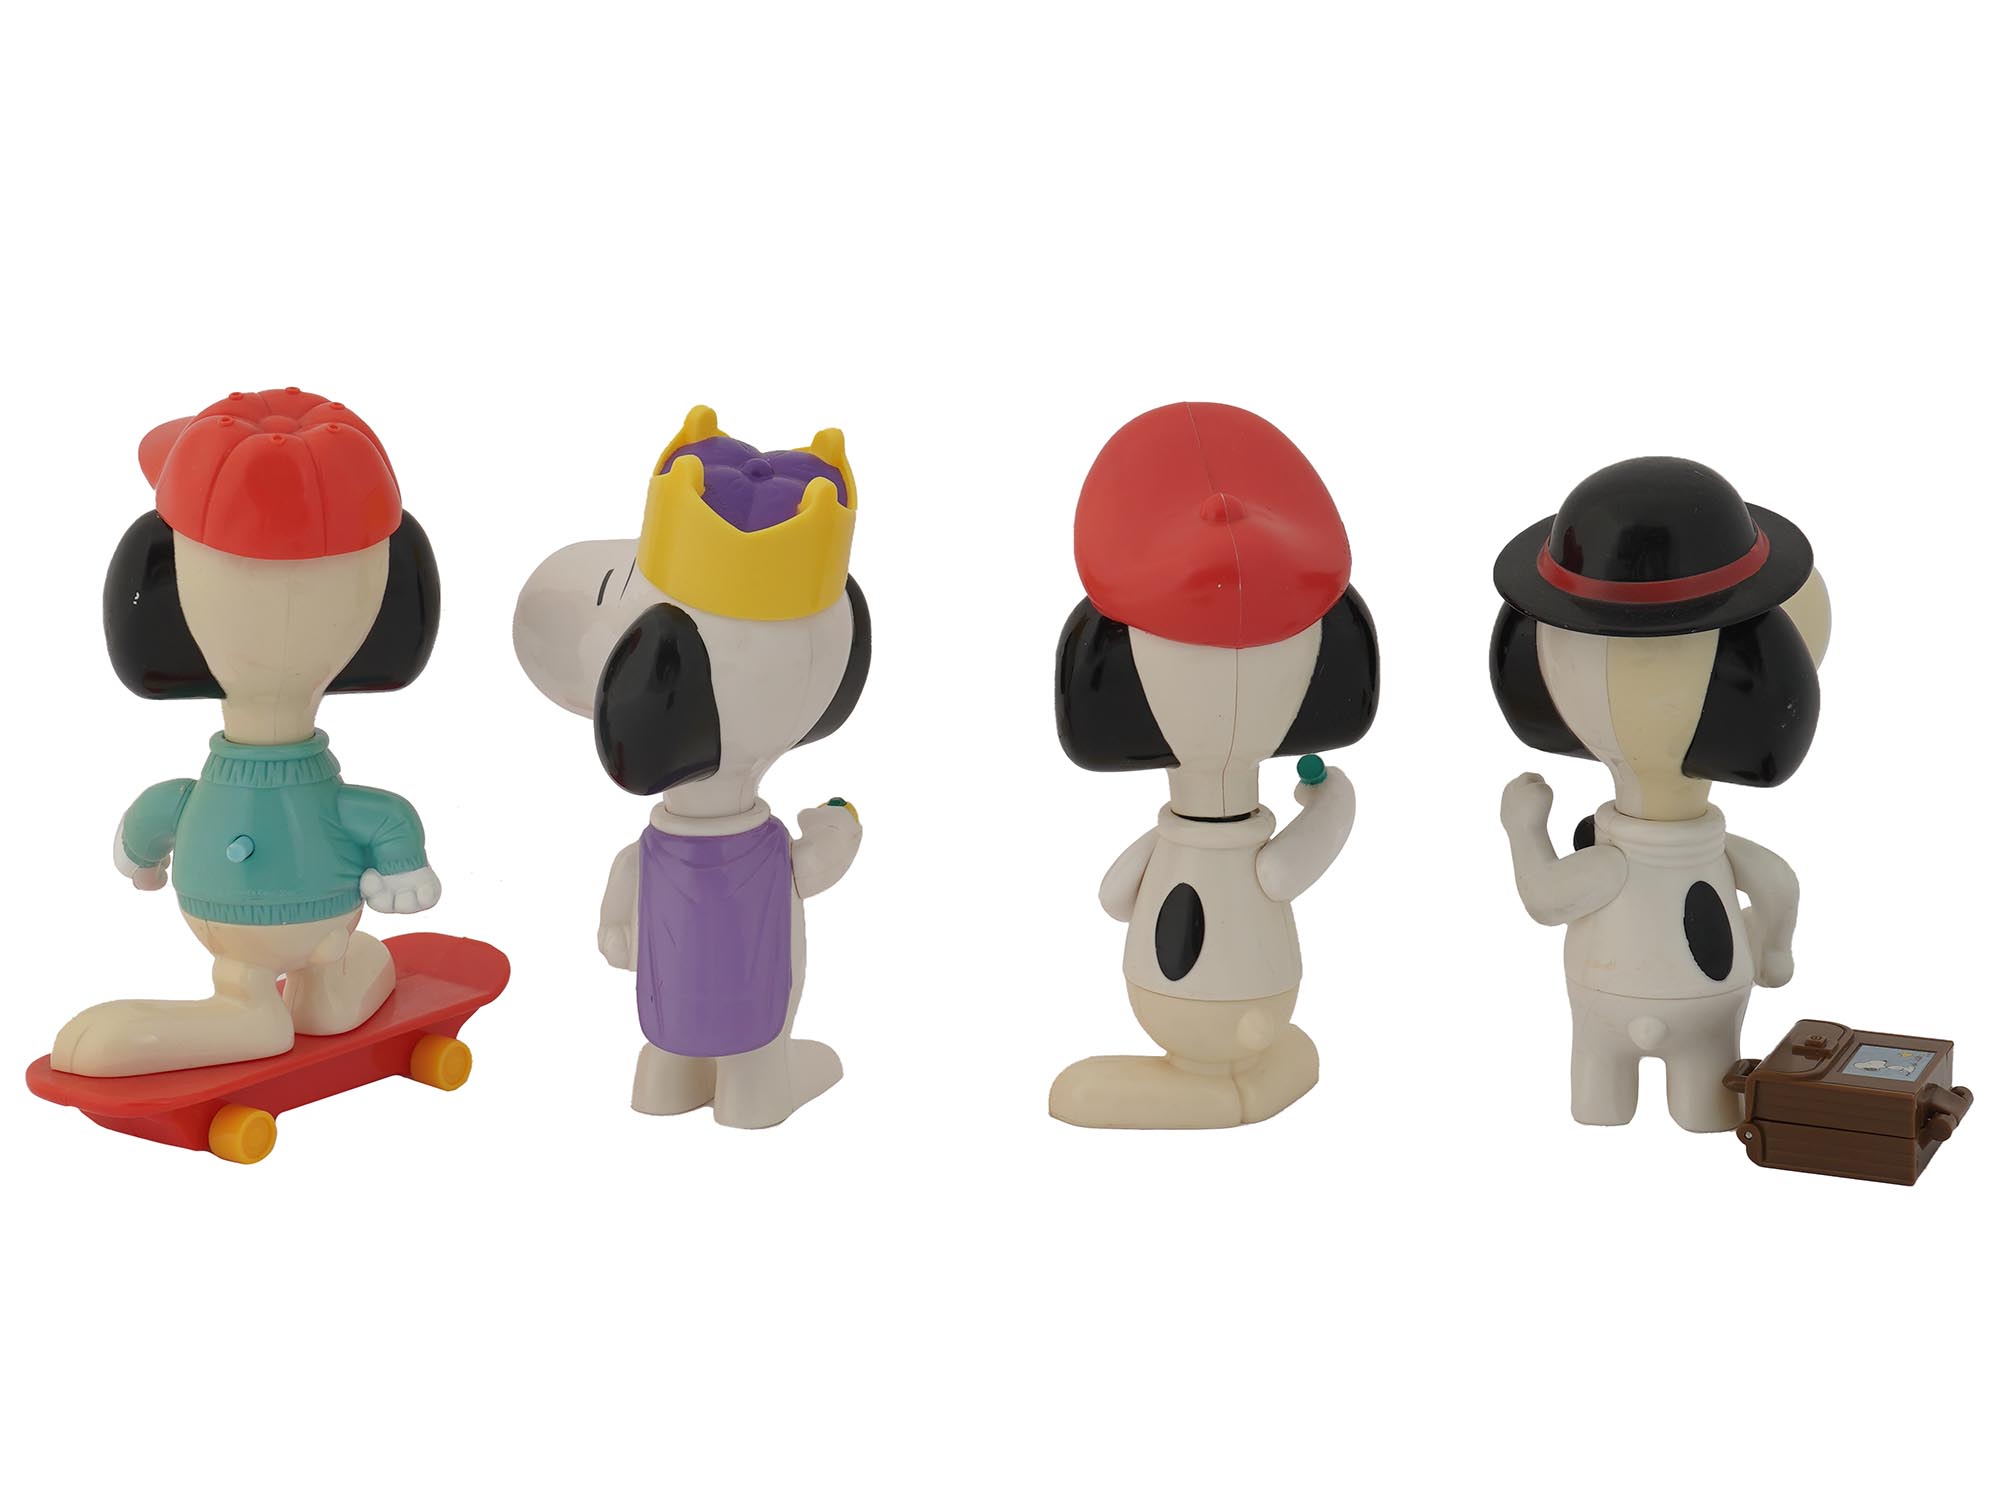 2000 FOUR SNOOPY MCDONALDS HAPPY MEAL FIGURINES PIC-1